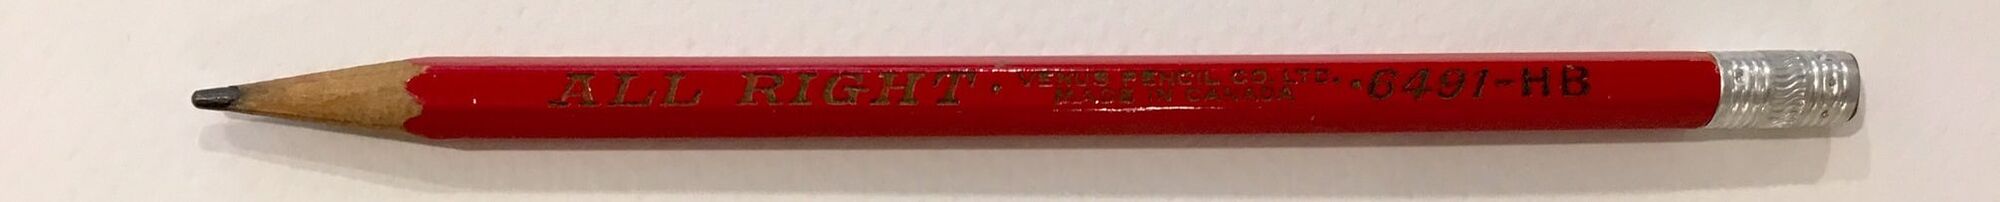 4 GOLIATH Vintage Thick Pencils Wide Lead by Venus #89 RED